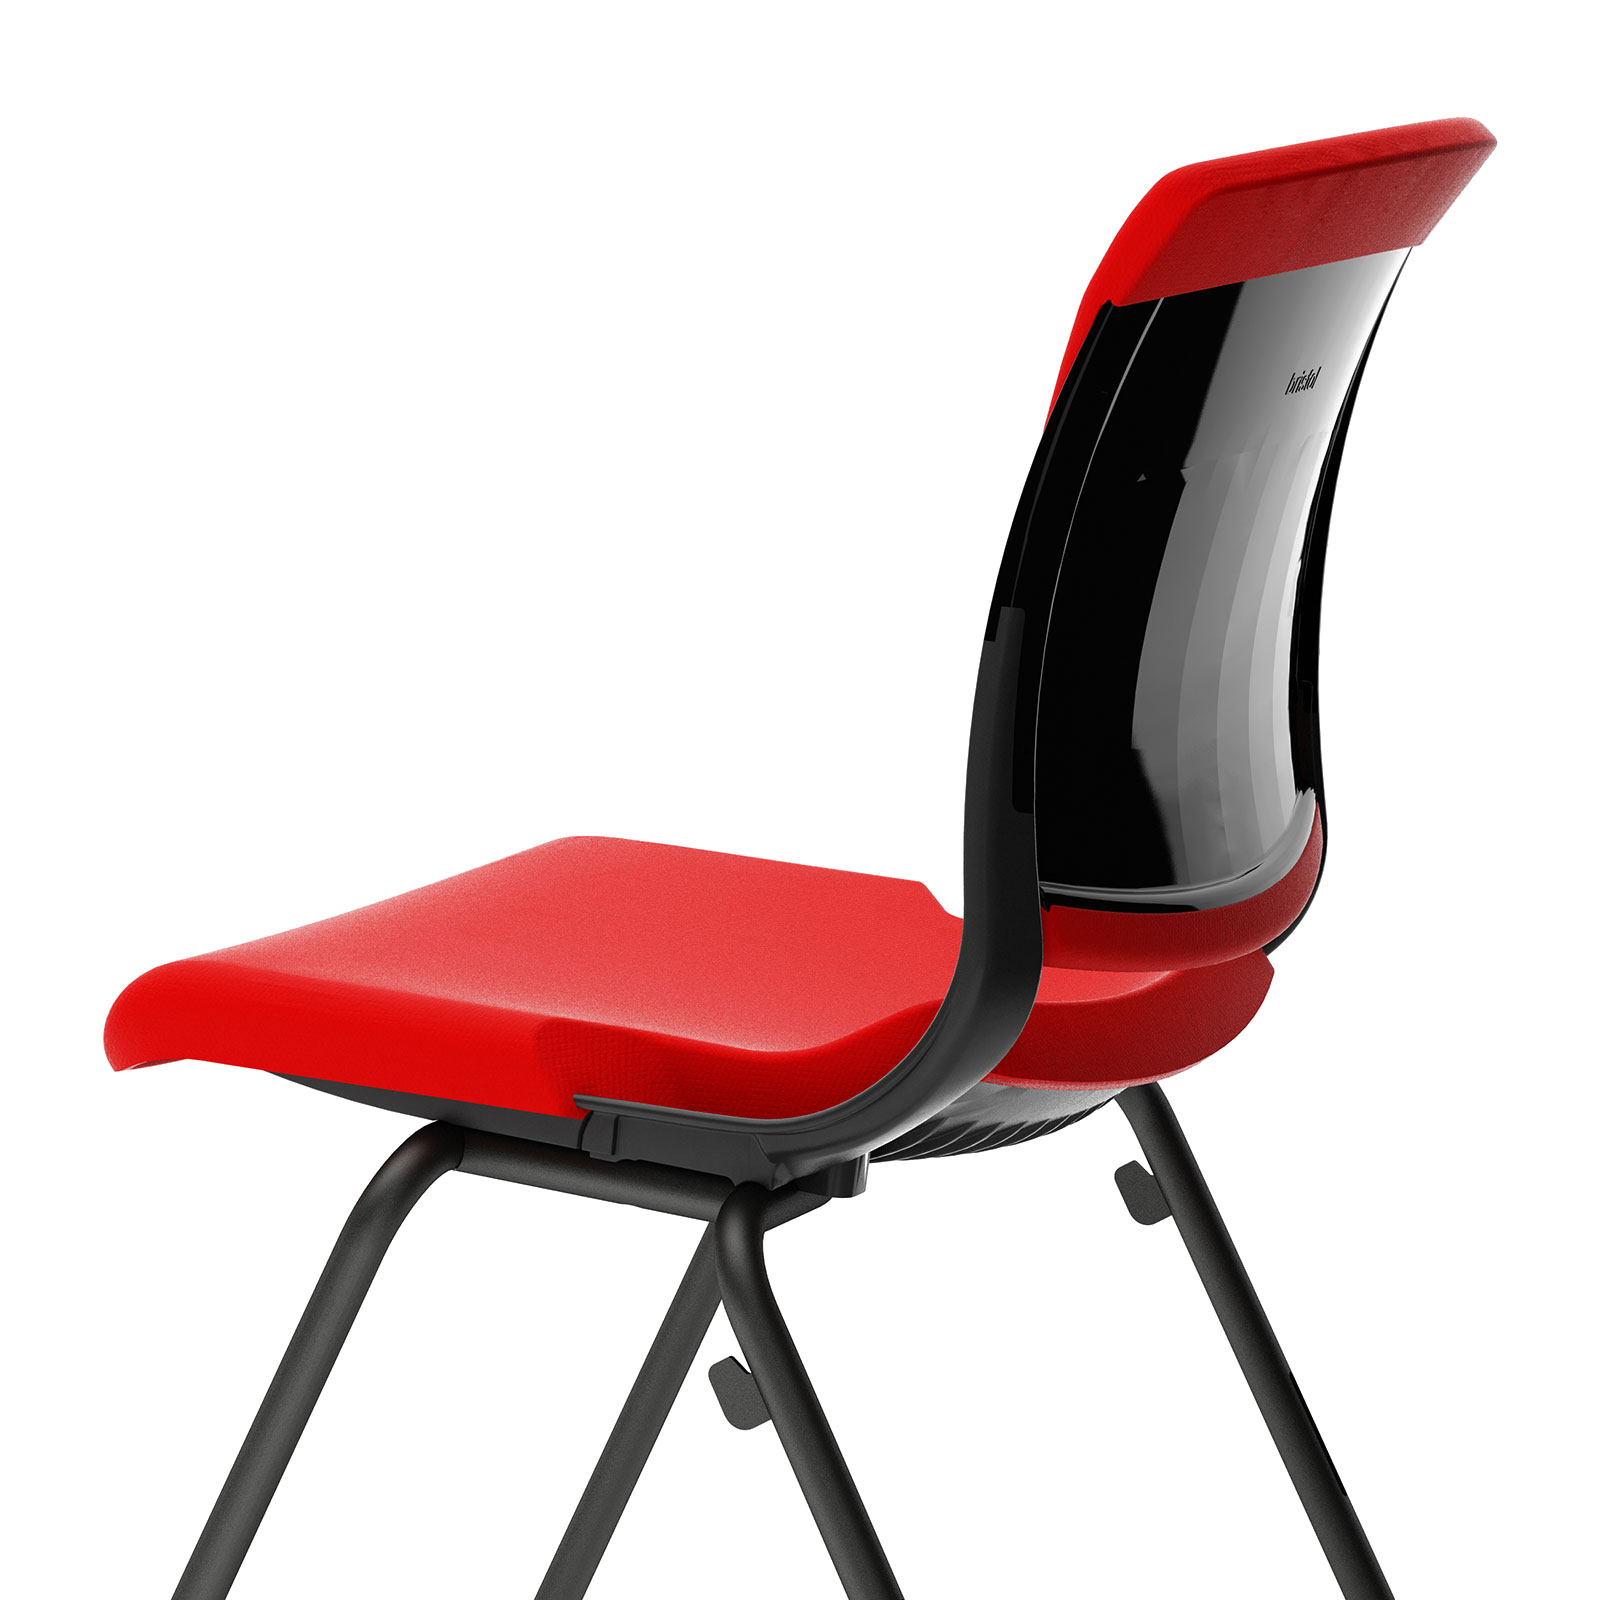 Red Myko chair with high gloss finish back